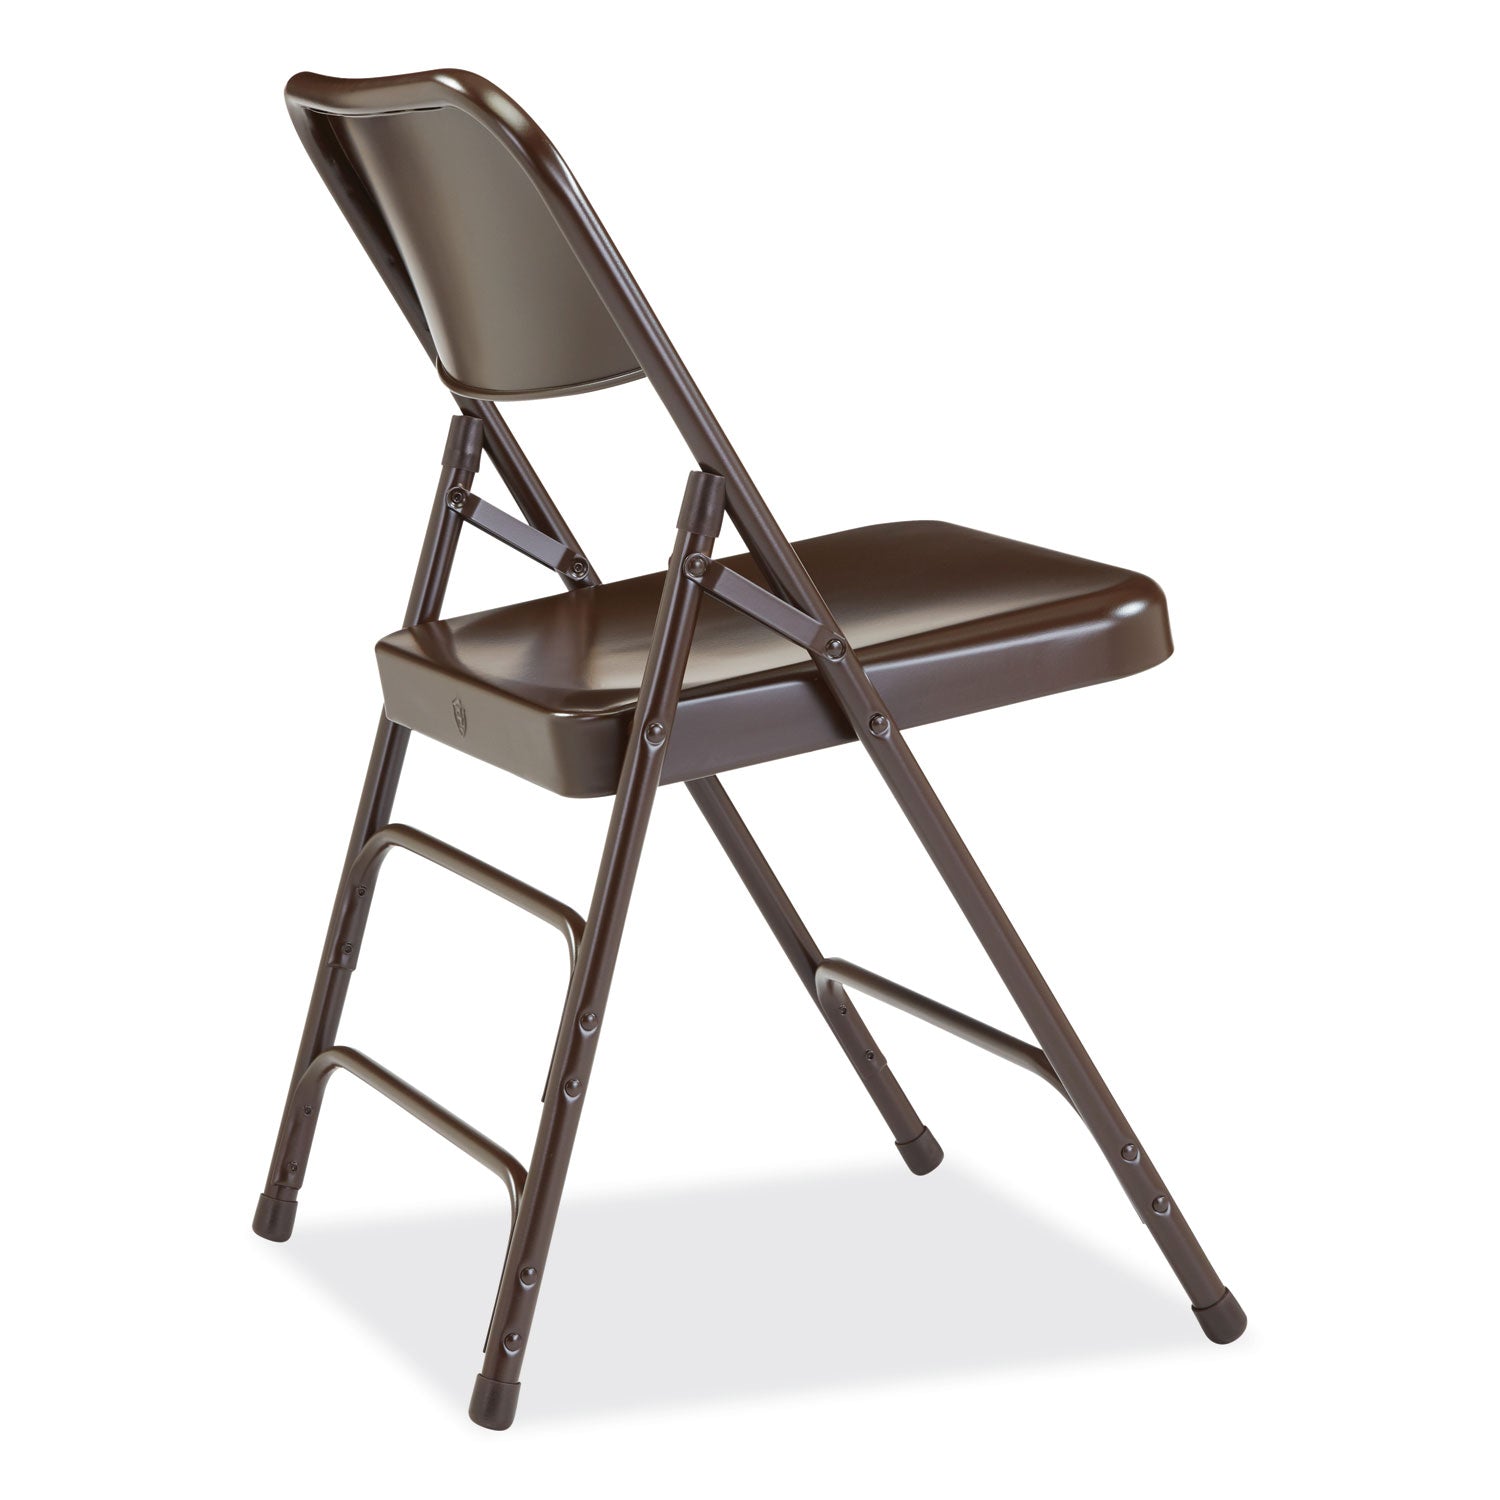 300-series-deluxe-all-steel-triple-brace-folding-chair-supports-480-lb-1725-seat-ht-brown-4-ct-ships-in-1-3-bus-days_nps303 - 4